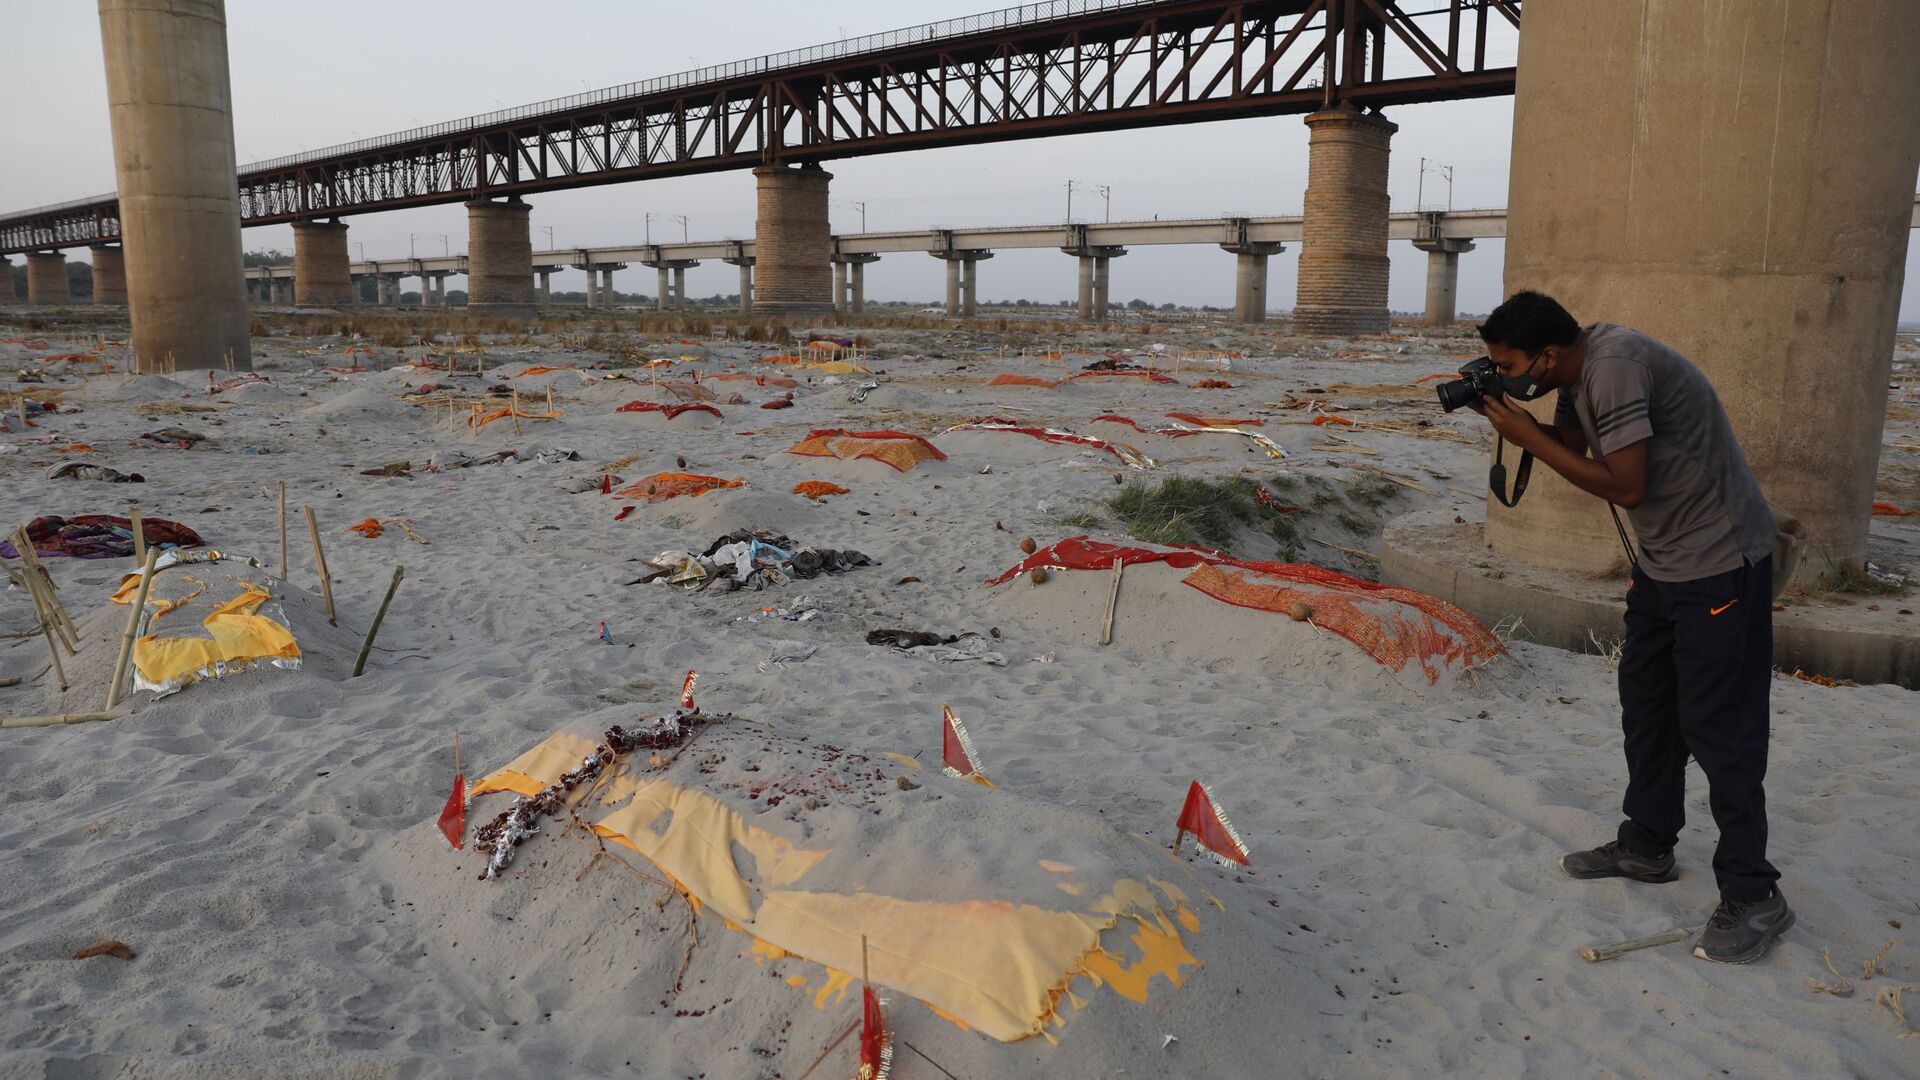 Bodies of suspected Covid-19 victims are seen in shallow graves buried in the sand near a cremation ground on the banks of Ganges River in Prayagraj, India, Saturday, May 15, 2021 - Sputnik International, 1920, 30.04.2022